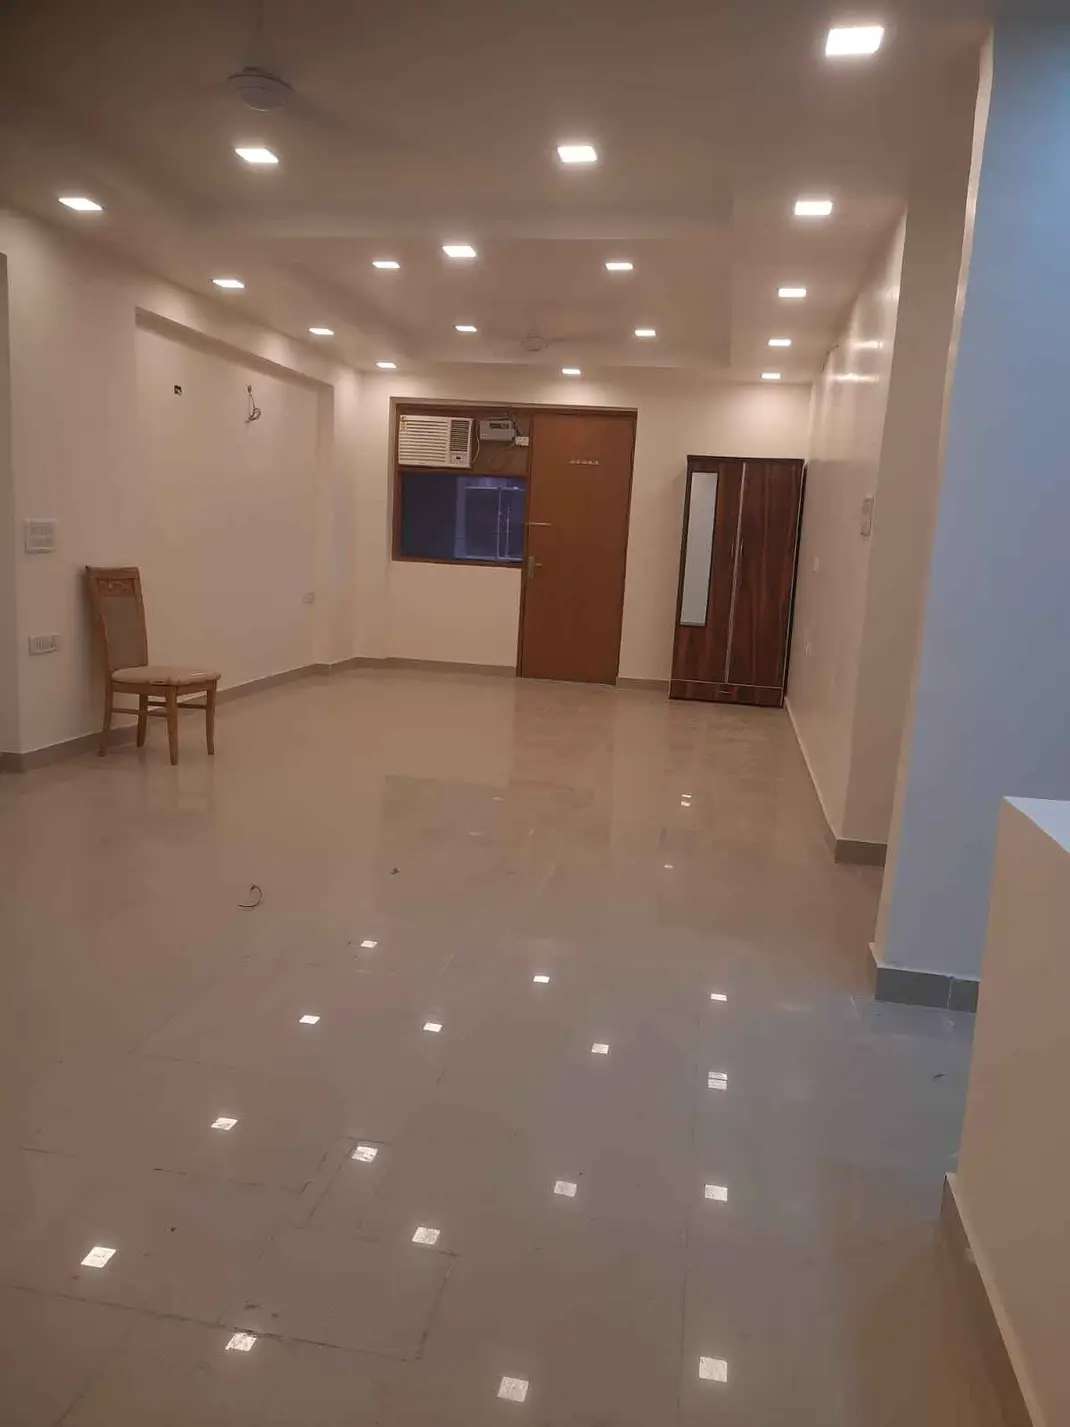 4 Bed/ 4 Bath Rent Apartment/ Flat, Furnished for rent @DLF Phase 4 Gurugram